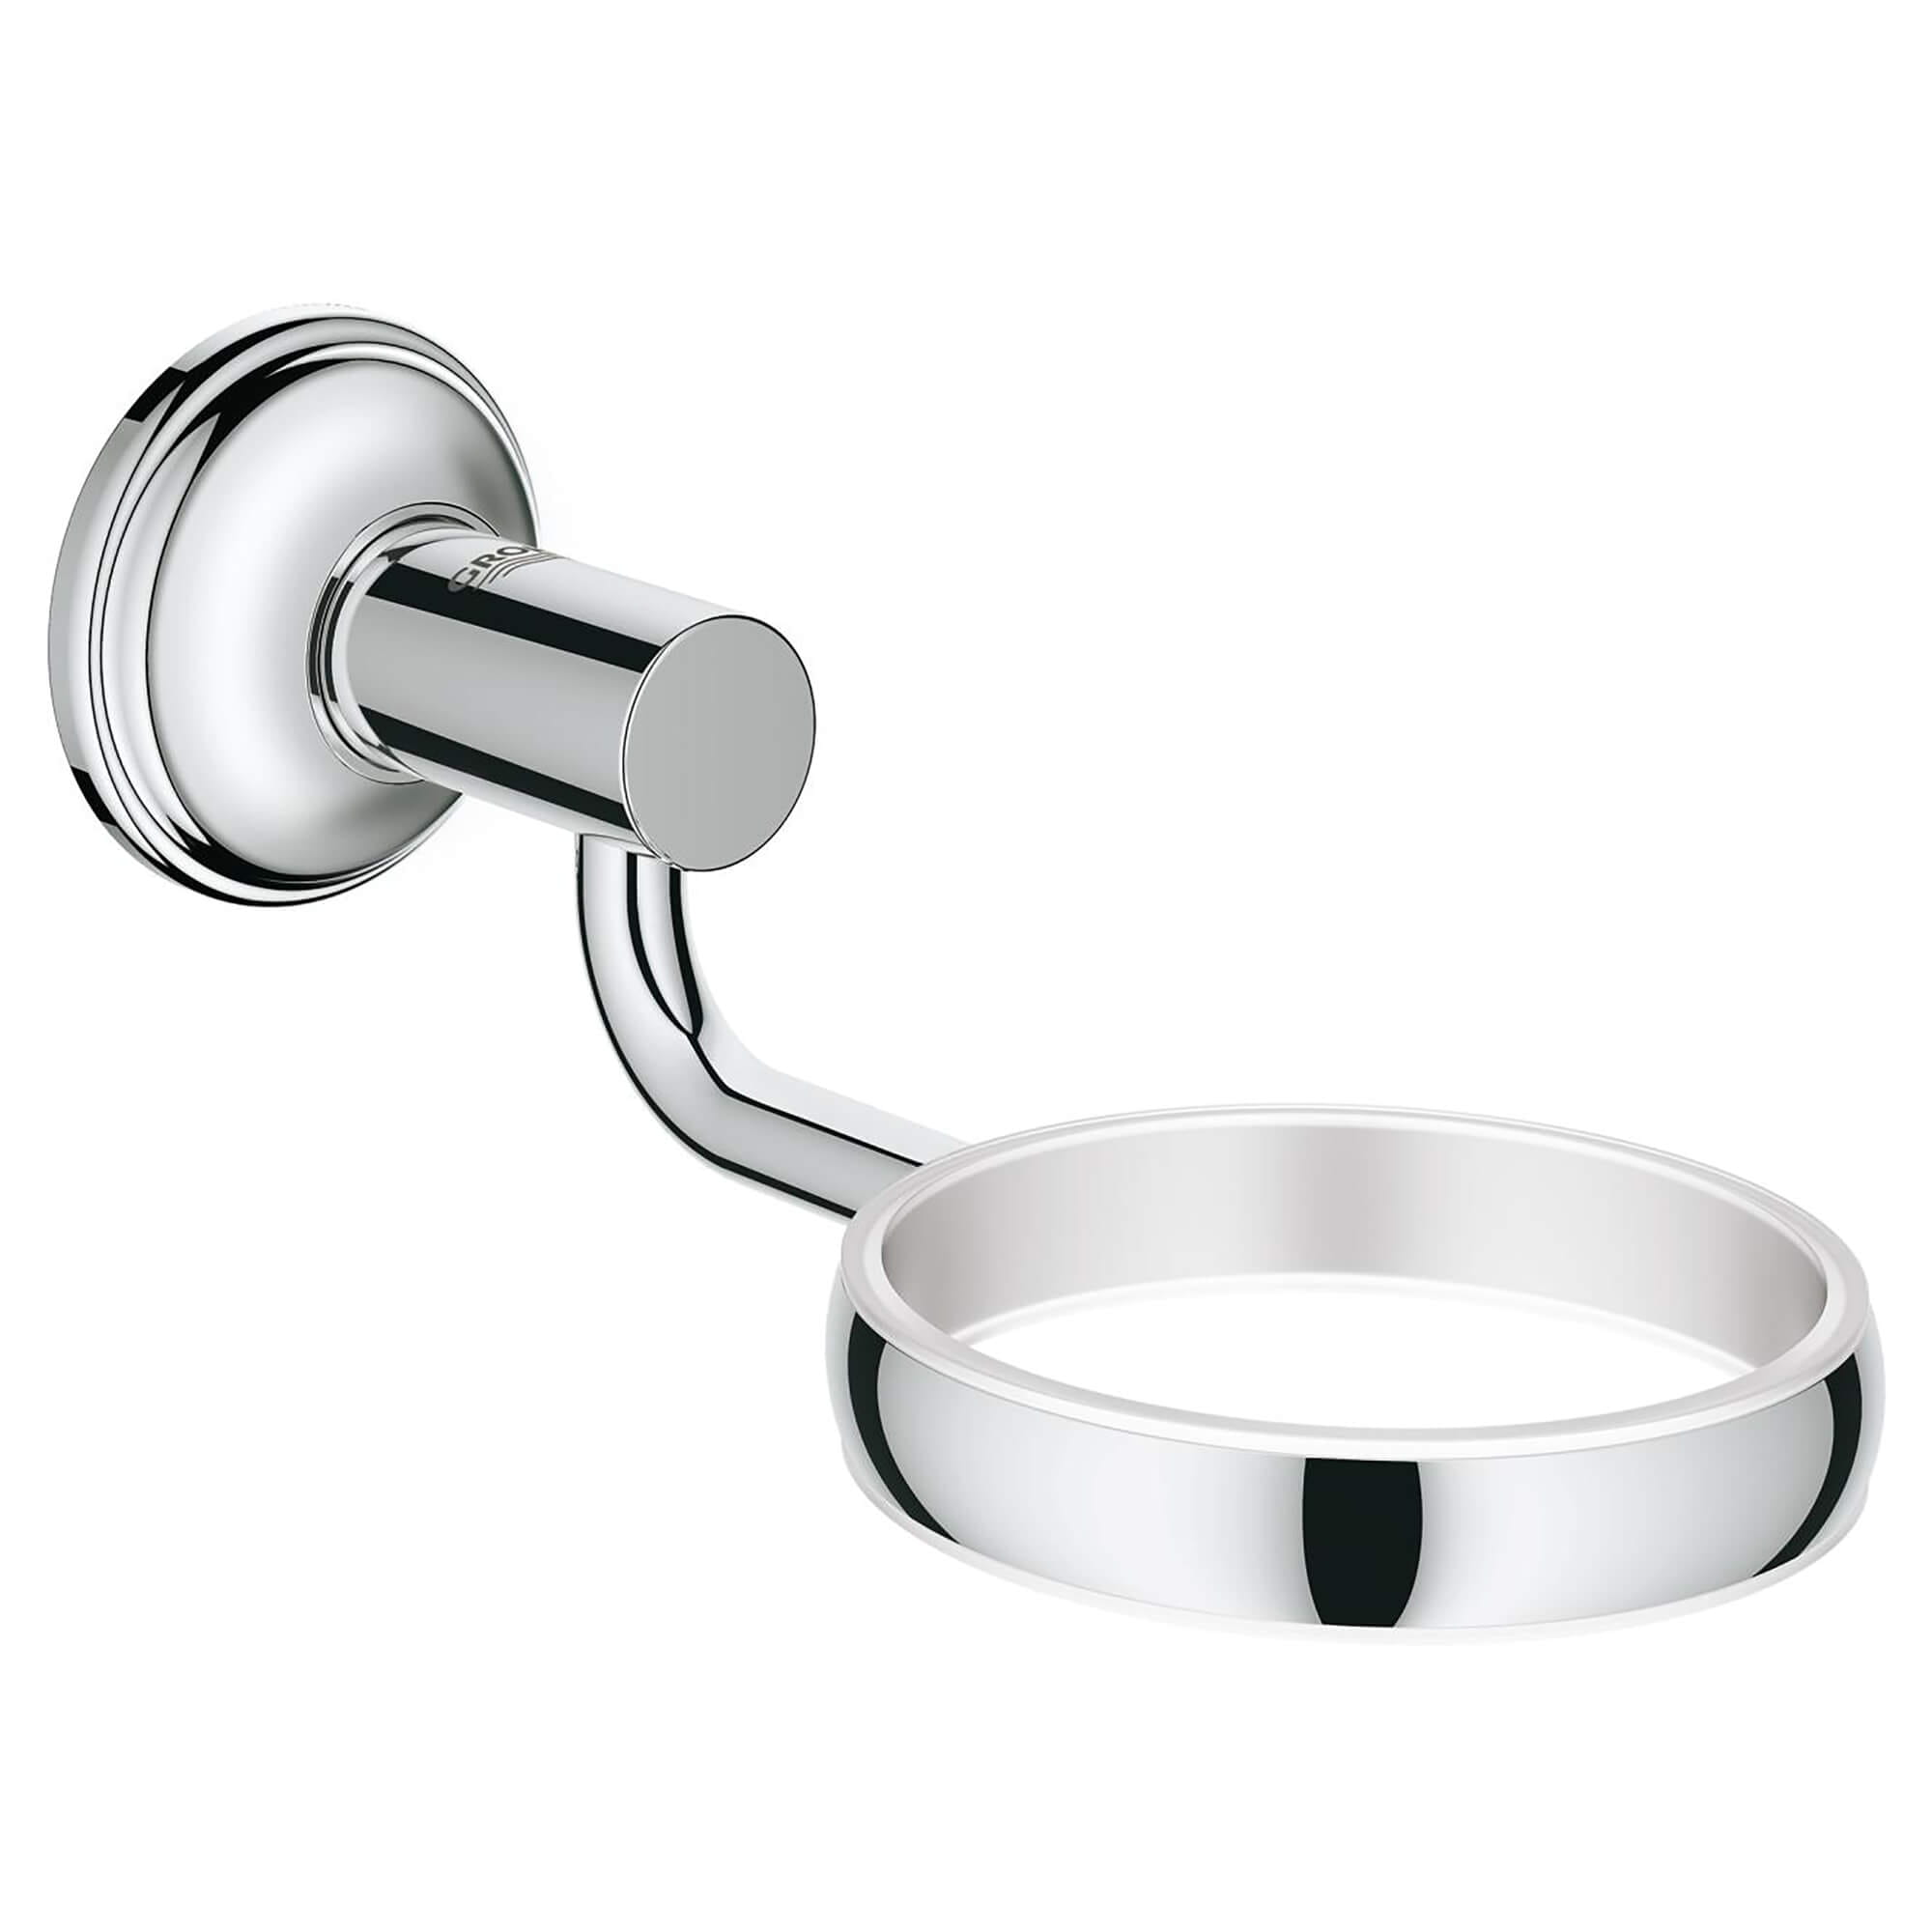 Essentials Authentic Soap Holder GROHE CHROME